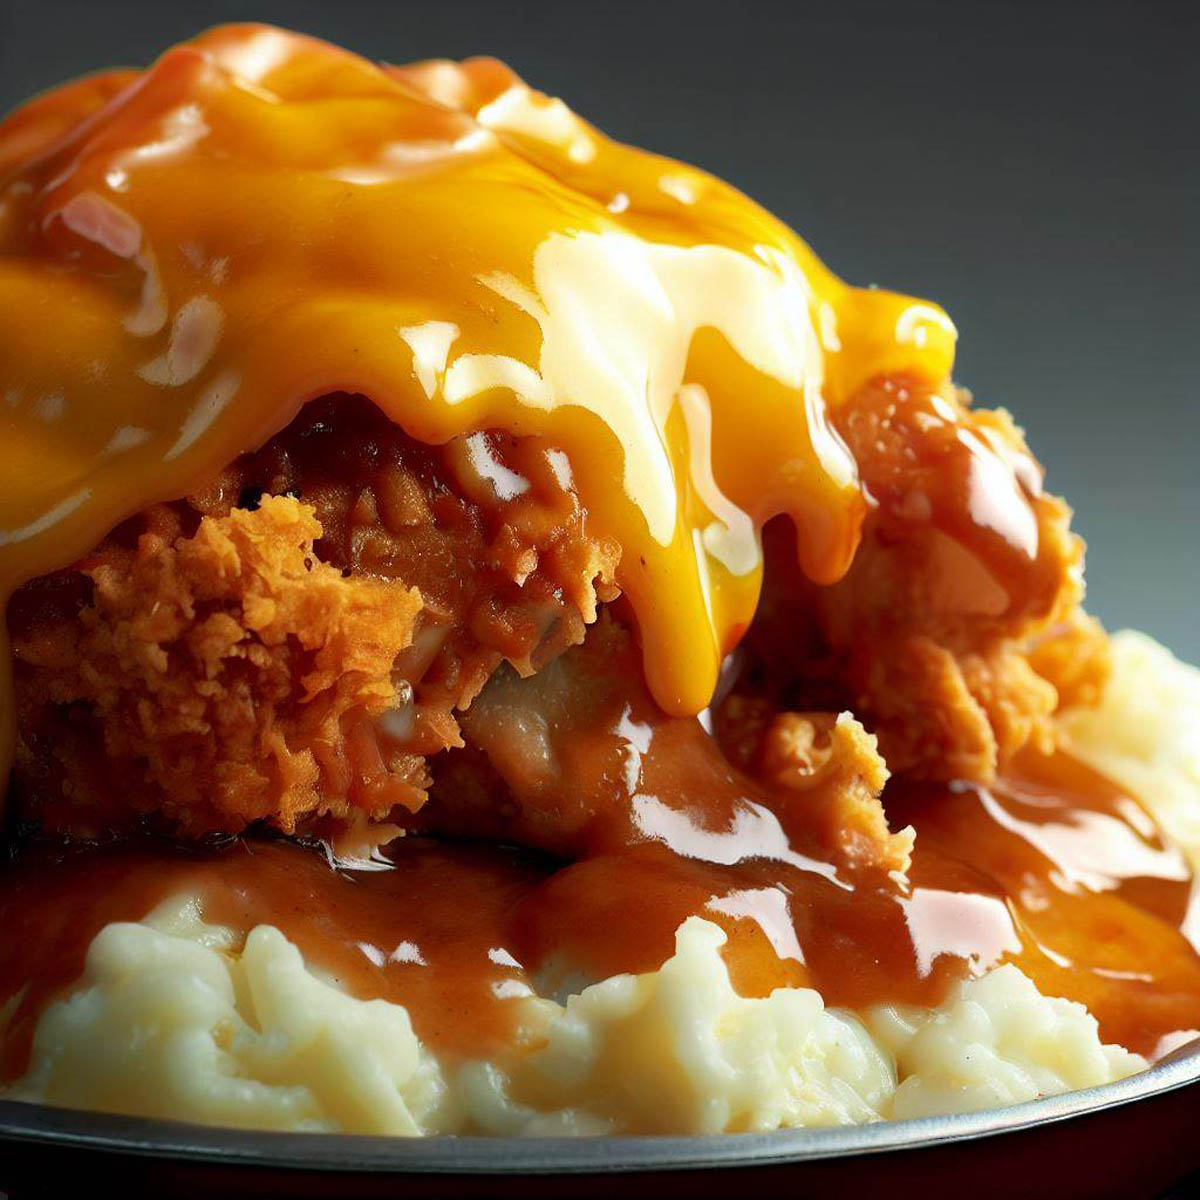 A close-up view of a finished KFC Famous Bowl Casserole showcasing crispy chicken and glossy gravy.